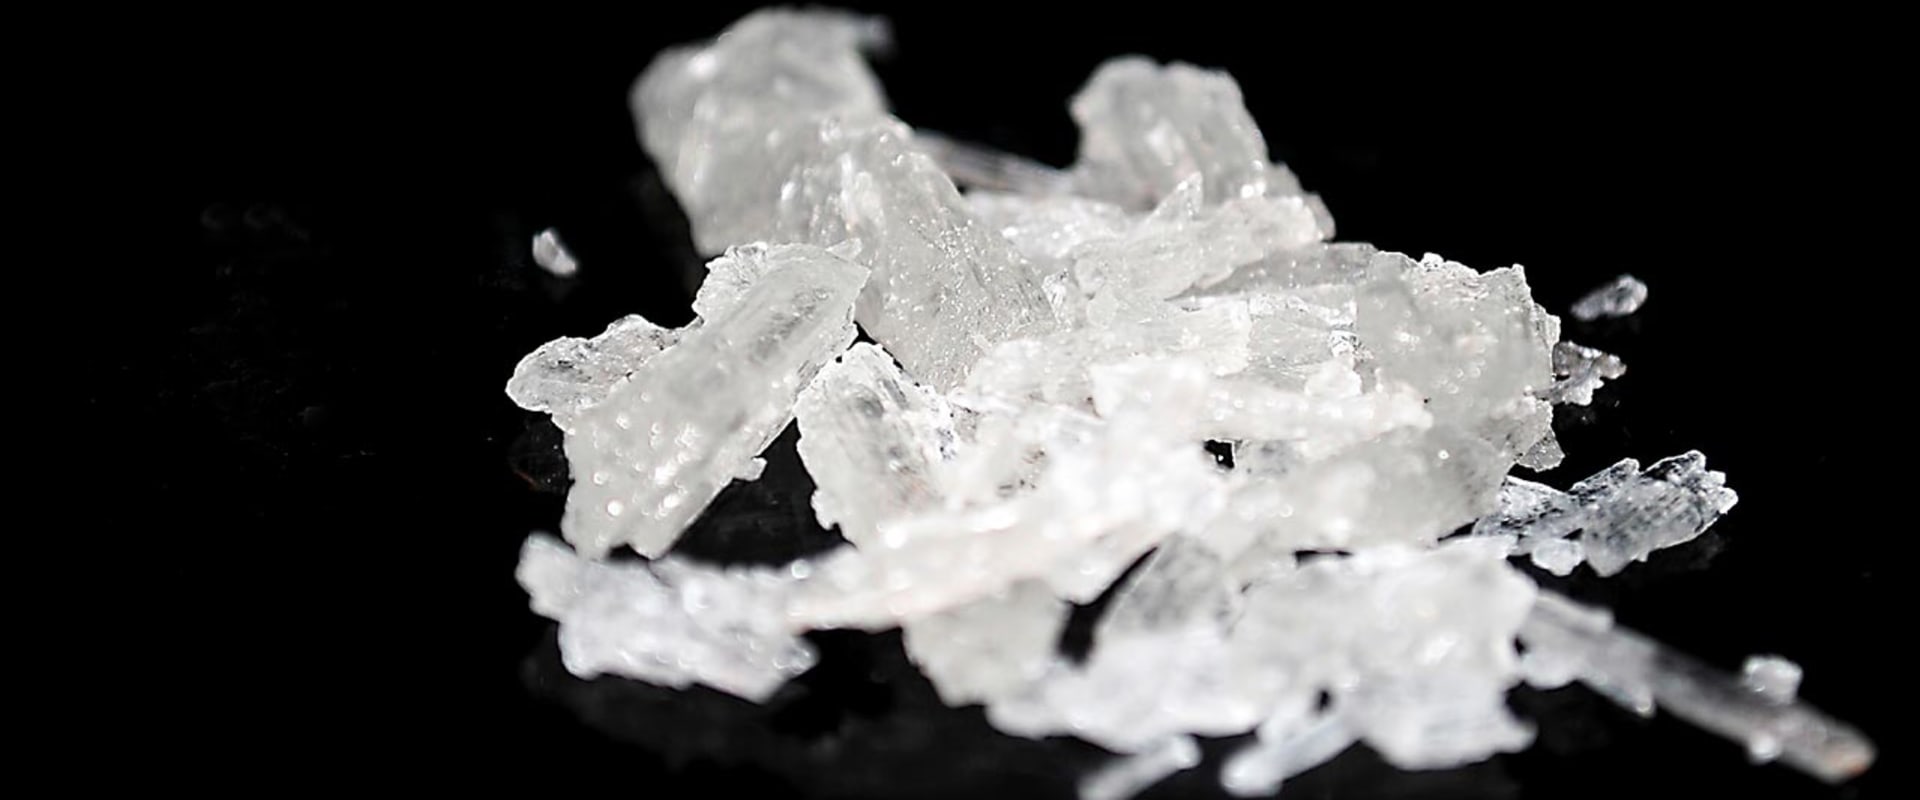 When was crystal meth first invented?